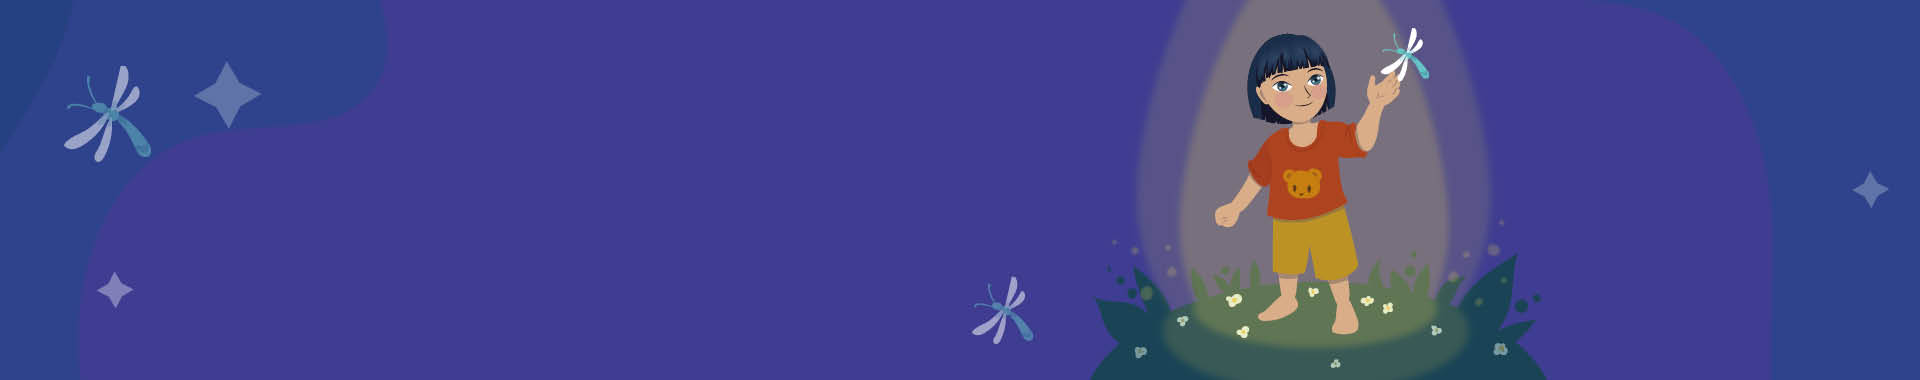 Header image for the project Toddlers in the Nexus